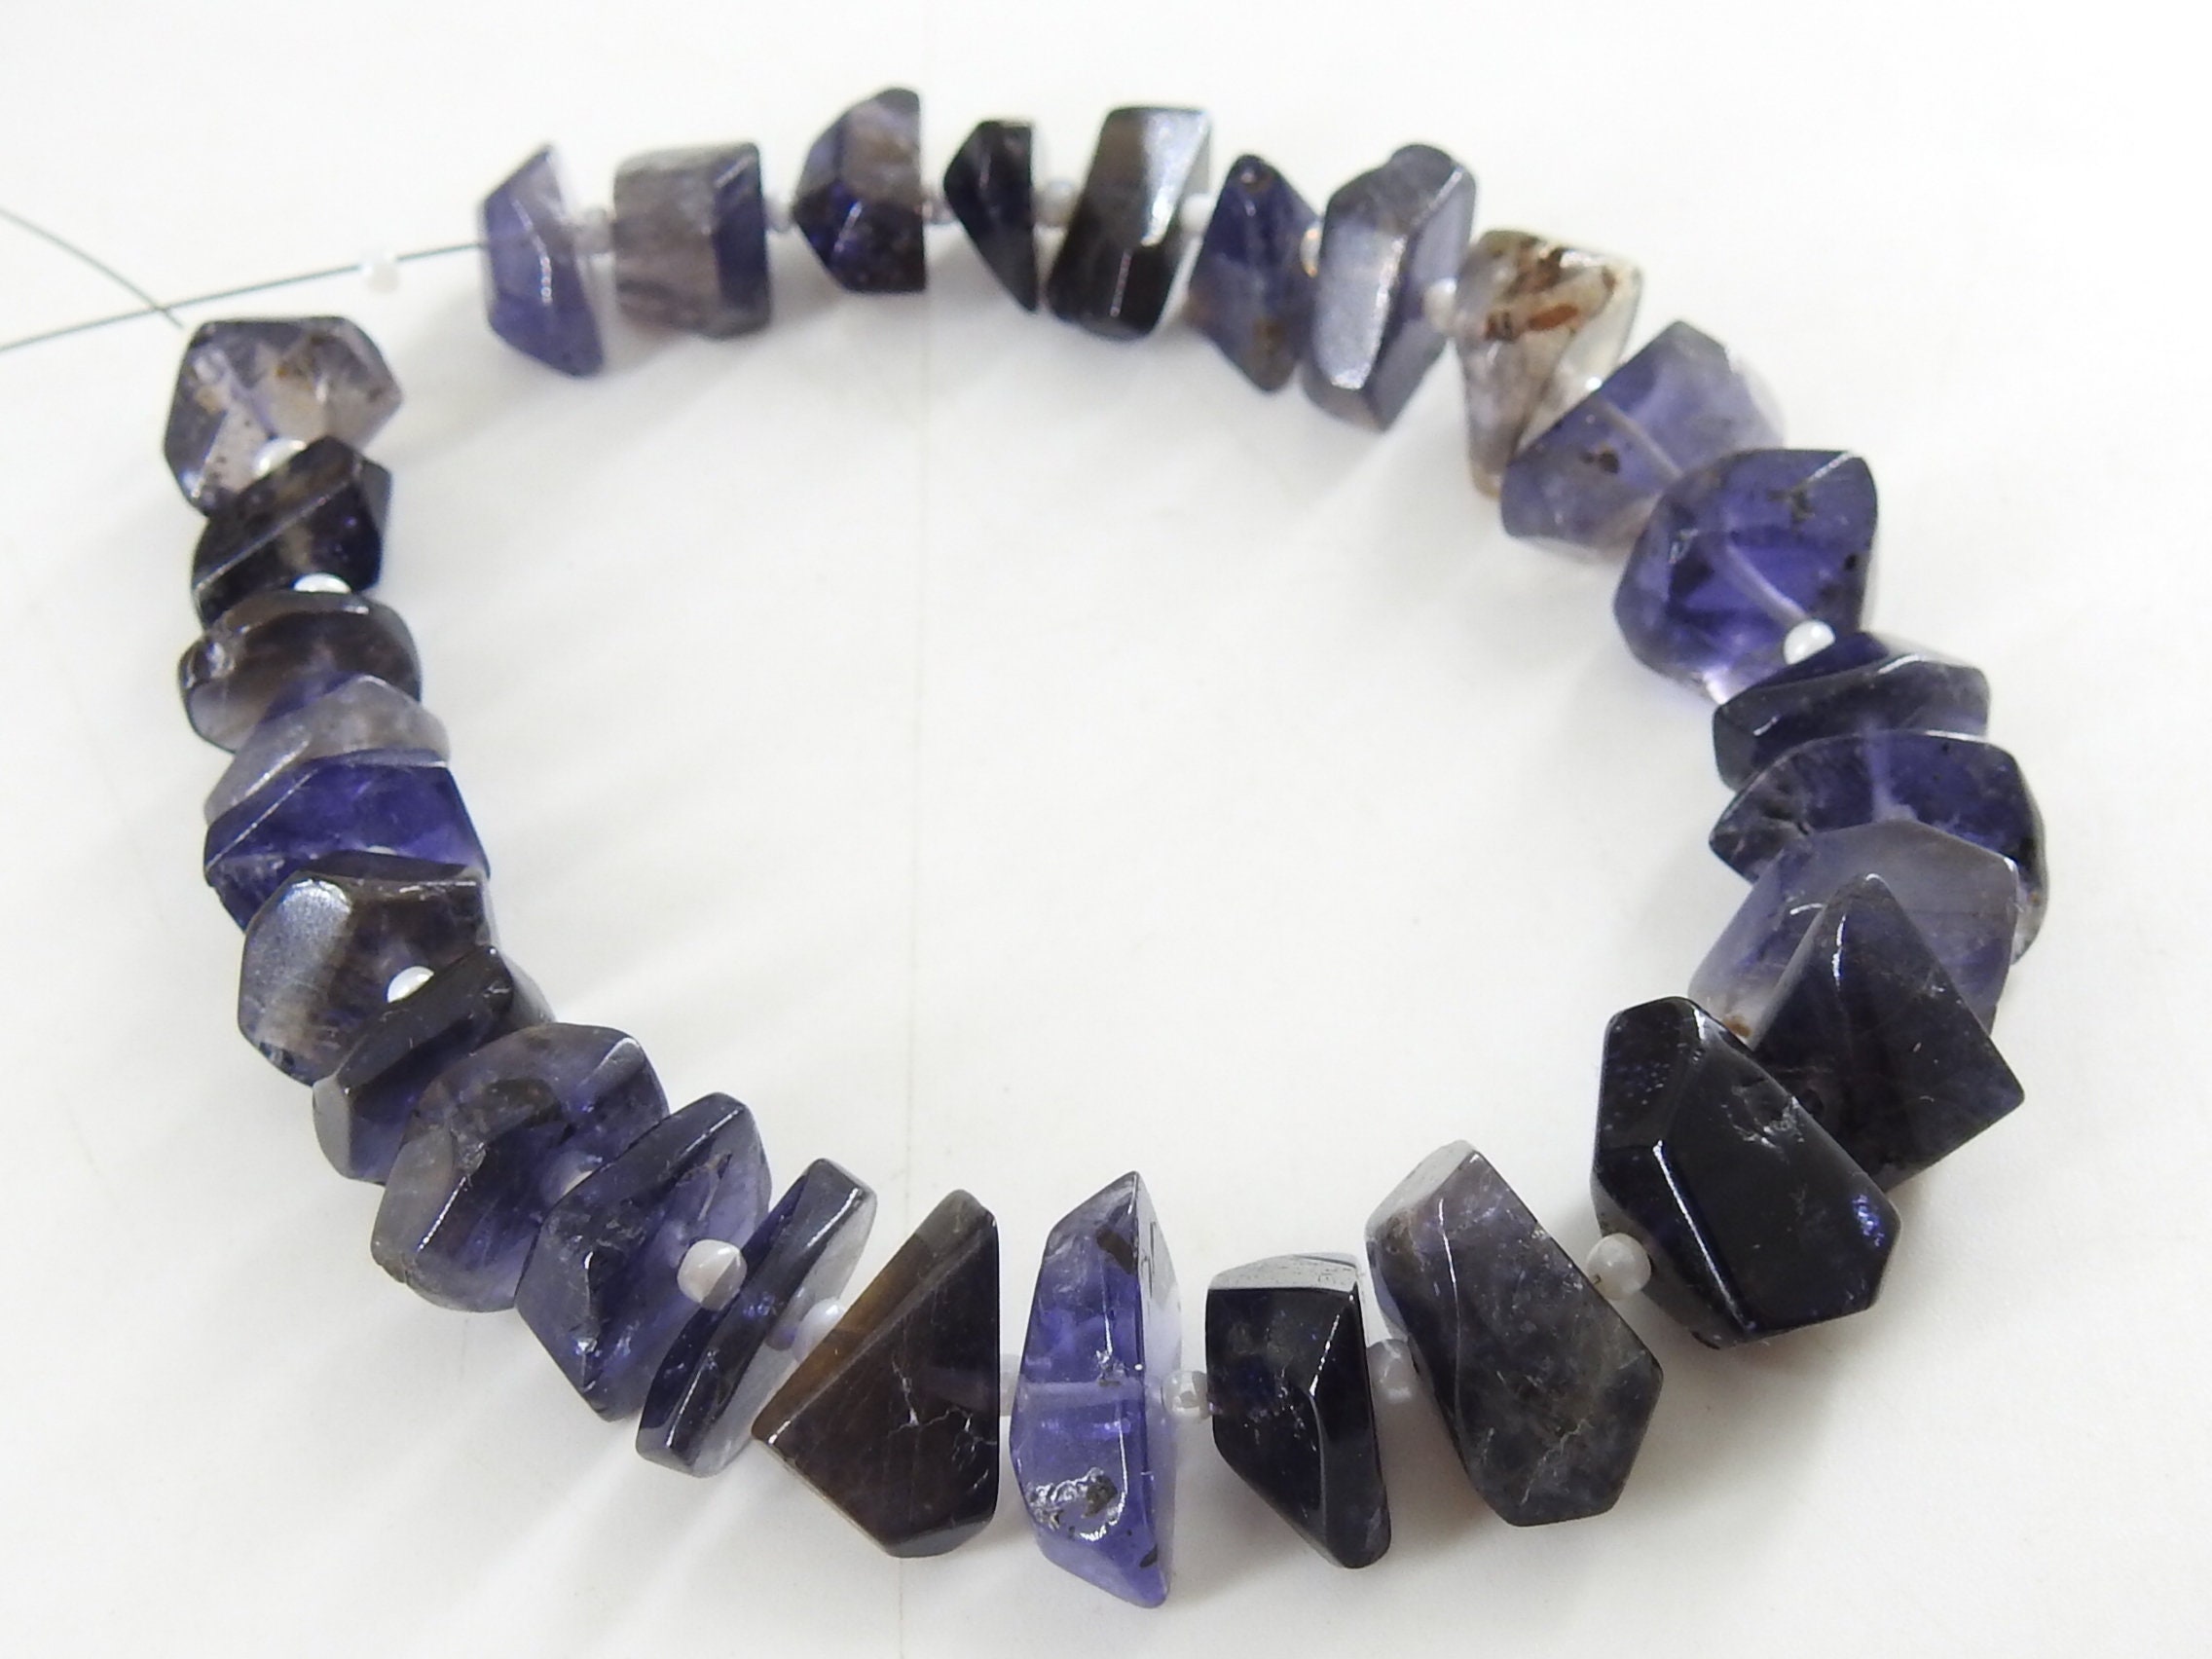 Iolite Faceted Tumble Beads,Nuggets,Irregular Shape,Loose Stone,Handmade,For Making Jewelry,Bracelet, 8Inch 18-10MM Approx,100%Natural TU5 | Save 33% - Rajasthan Living 11